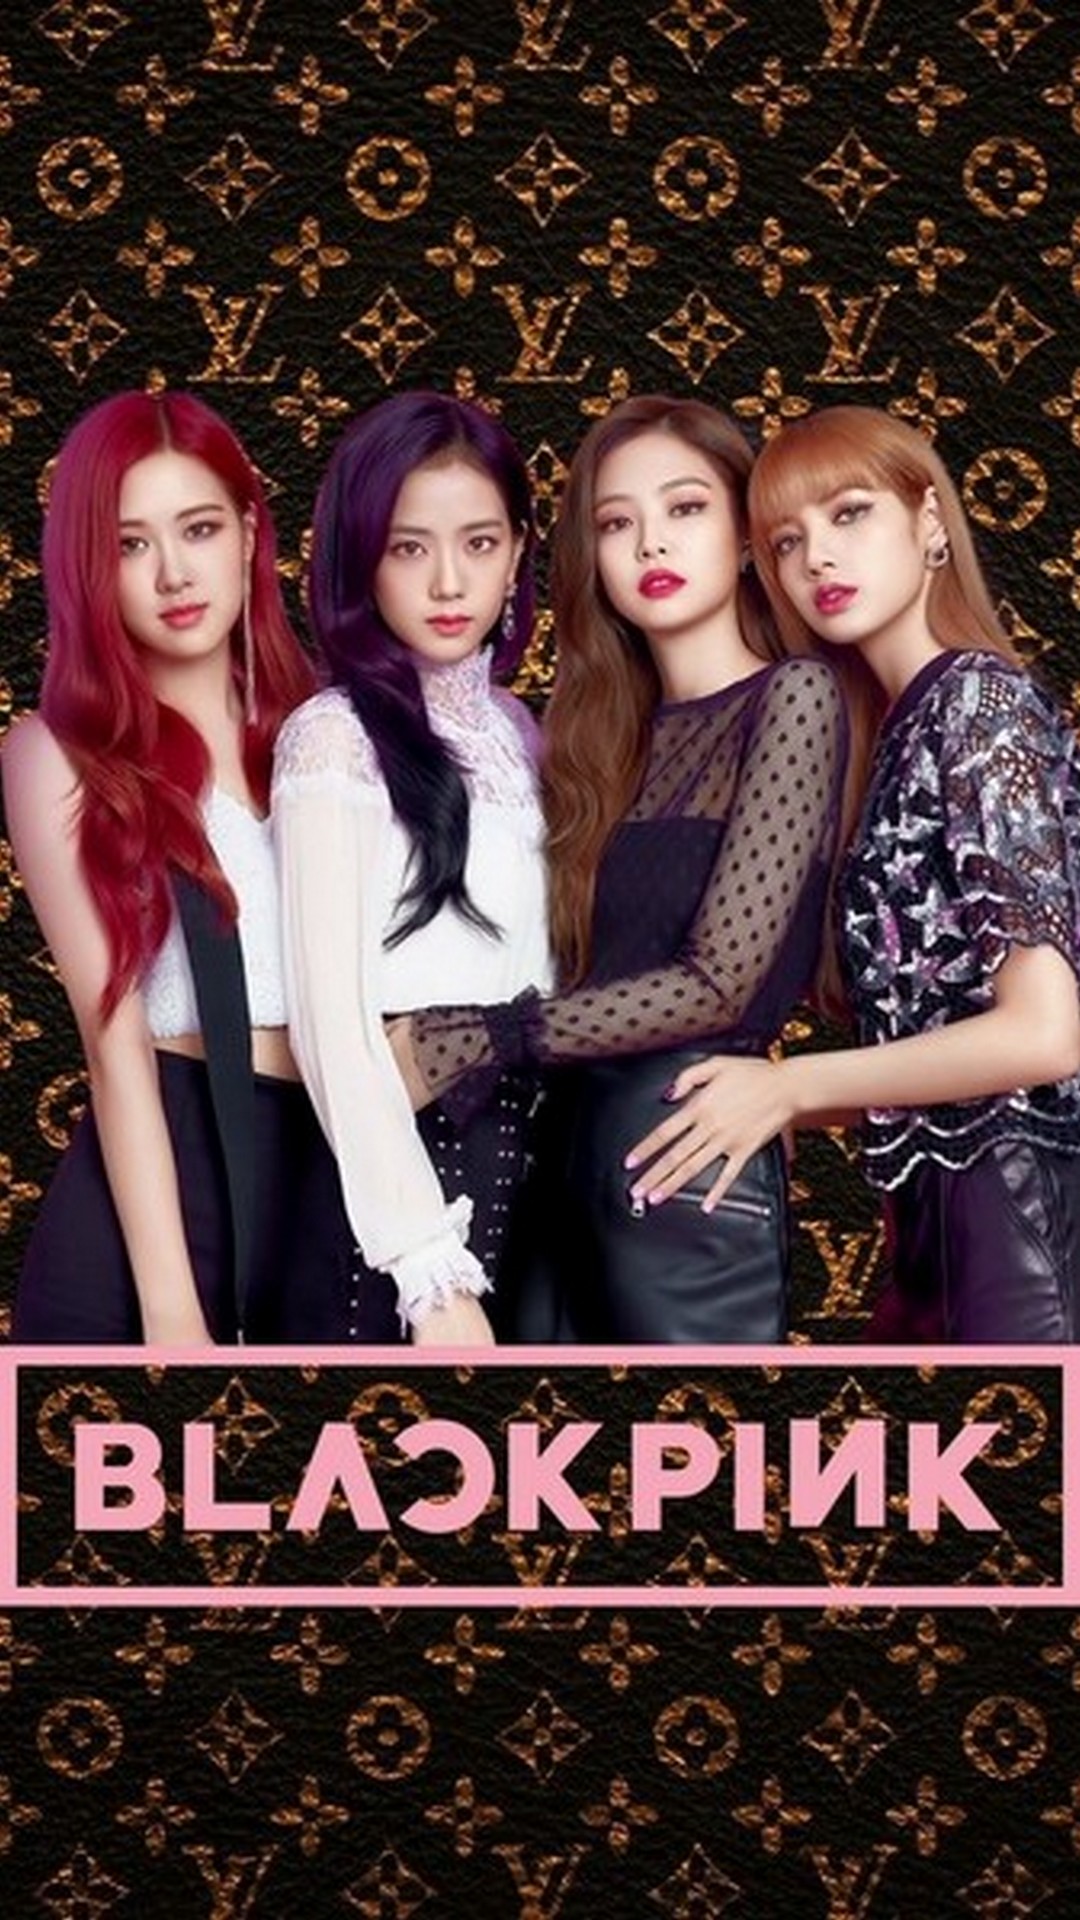 Blackpink Phone 8 Wallpaper with high-resolution 1080x1920 pixel. Download all Mobile Wallpapers and Use them as wallpapers for your iPhone, Tablet, iPad, Android and other mobile devices